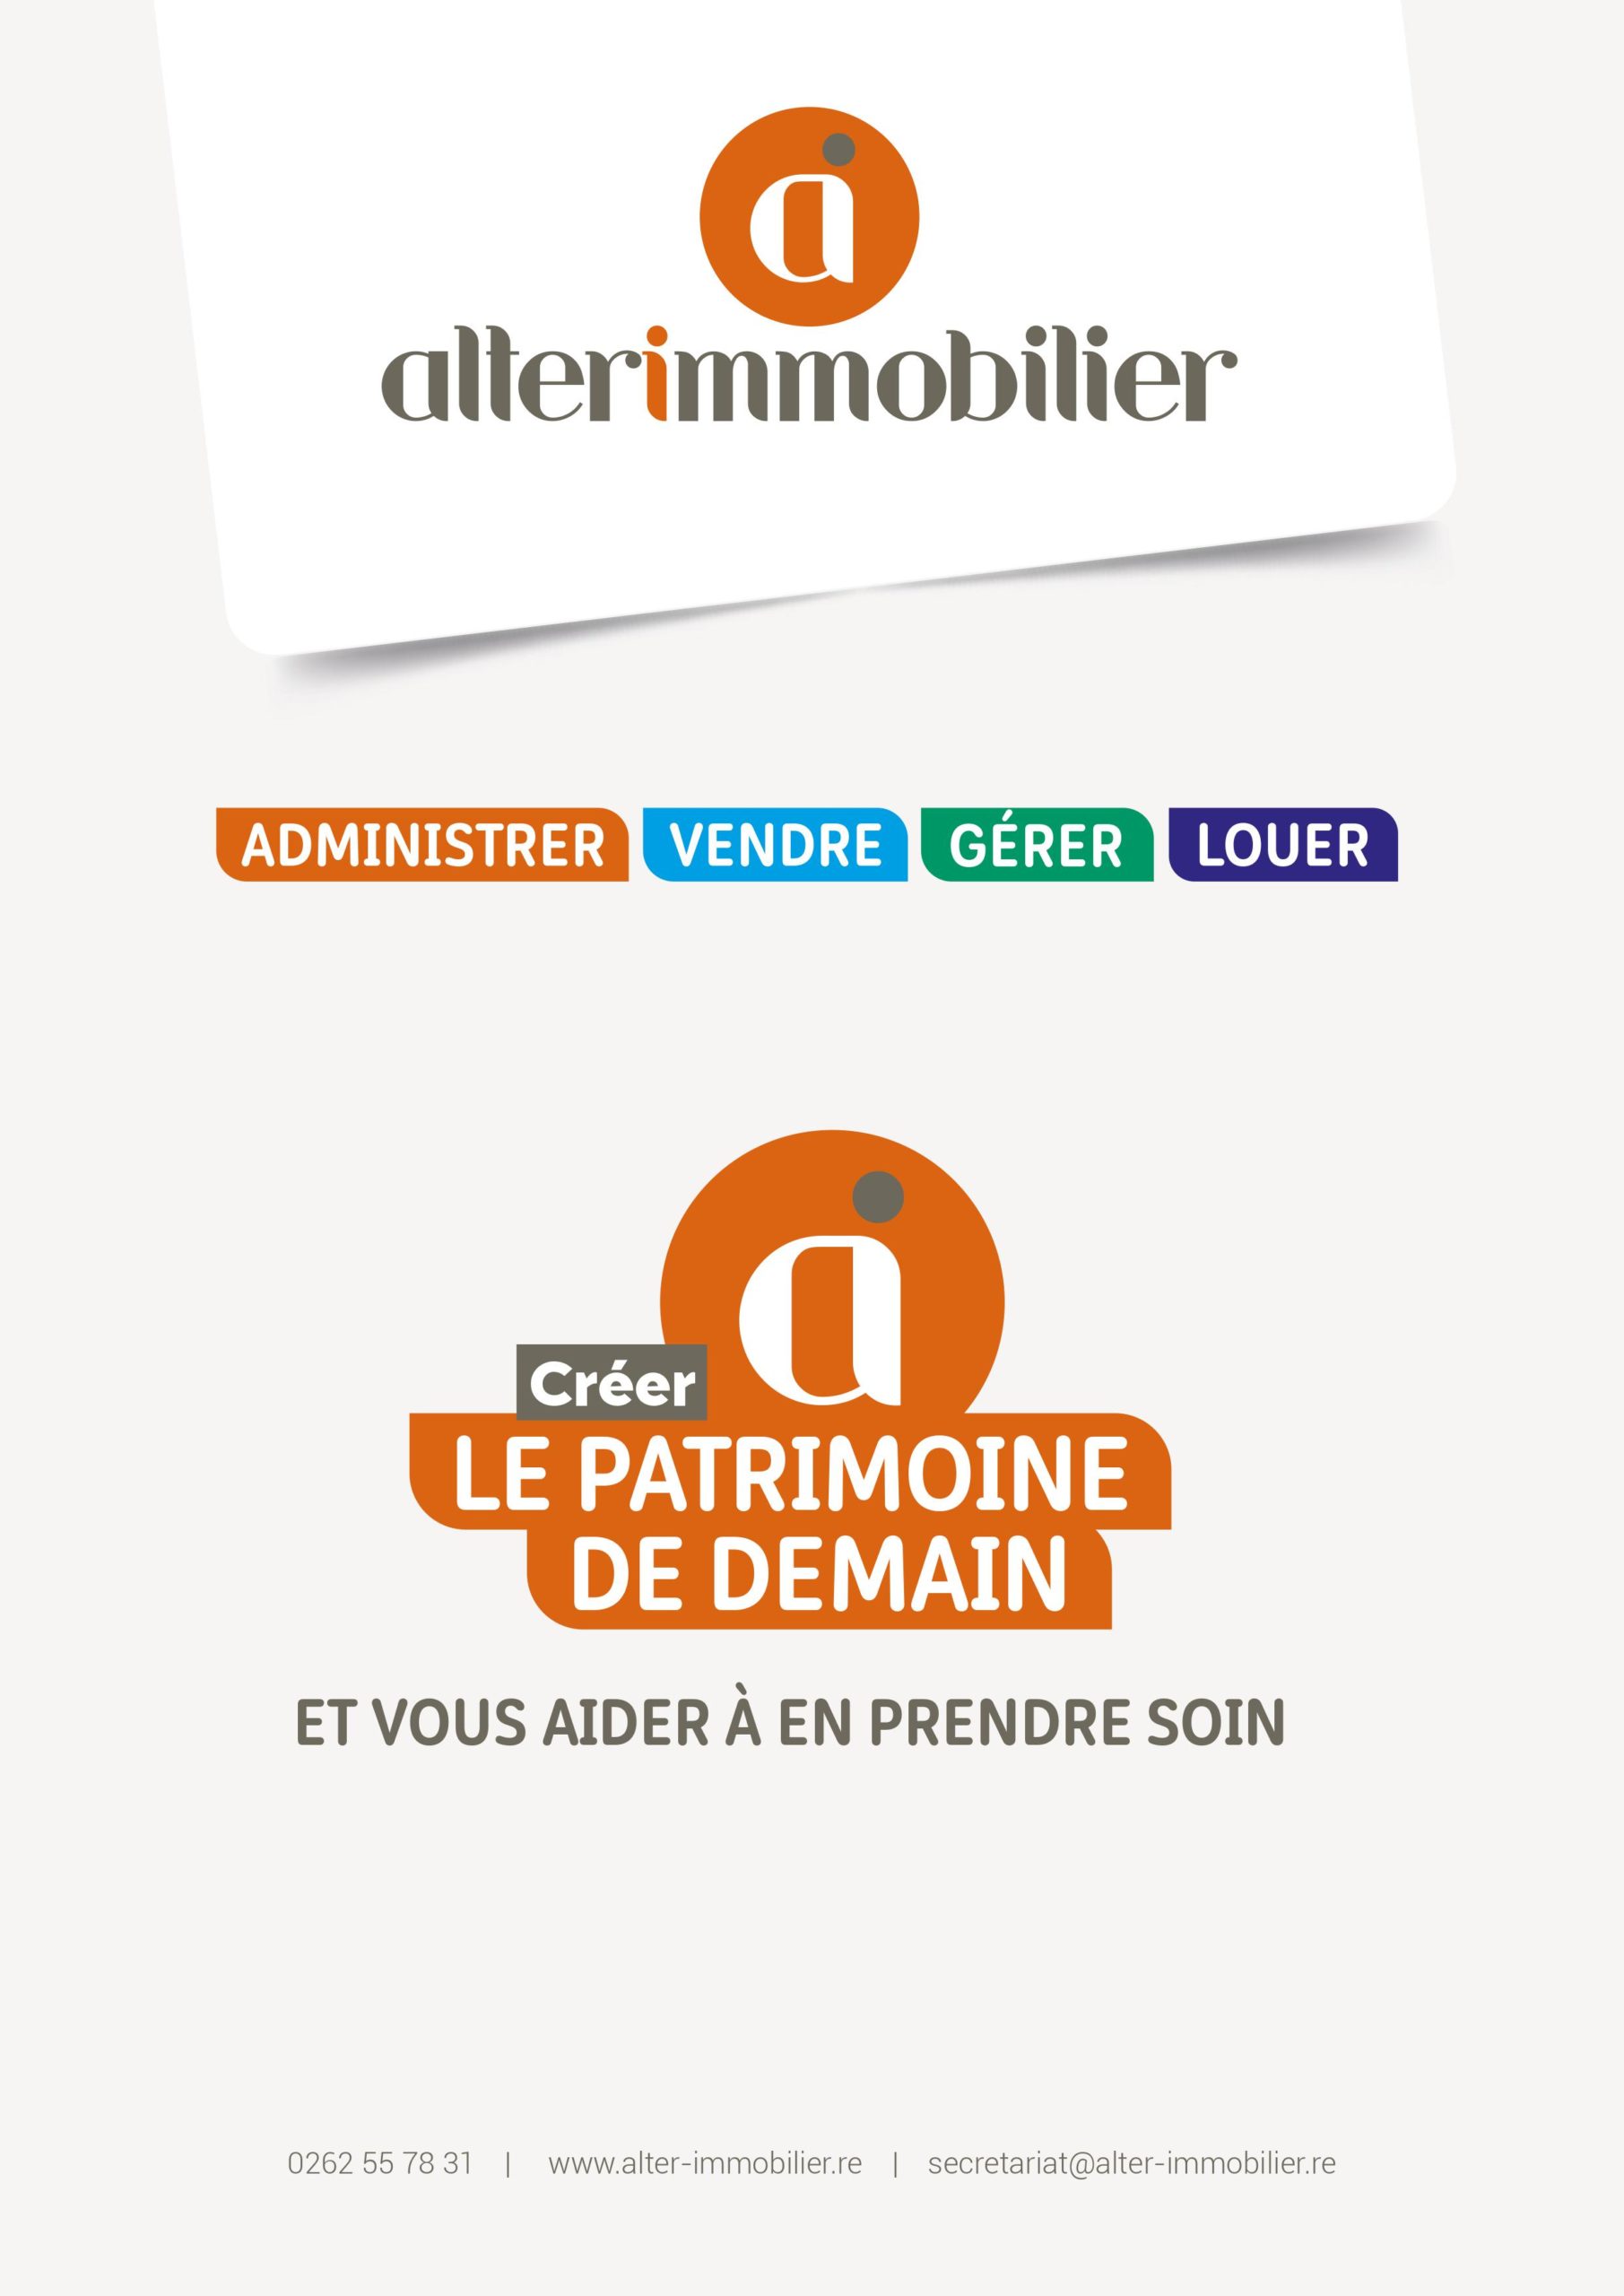 Team Alter Immobilier